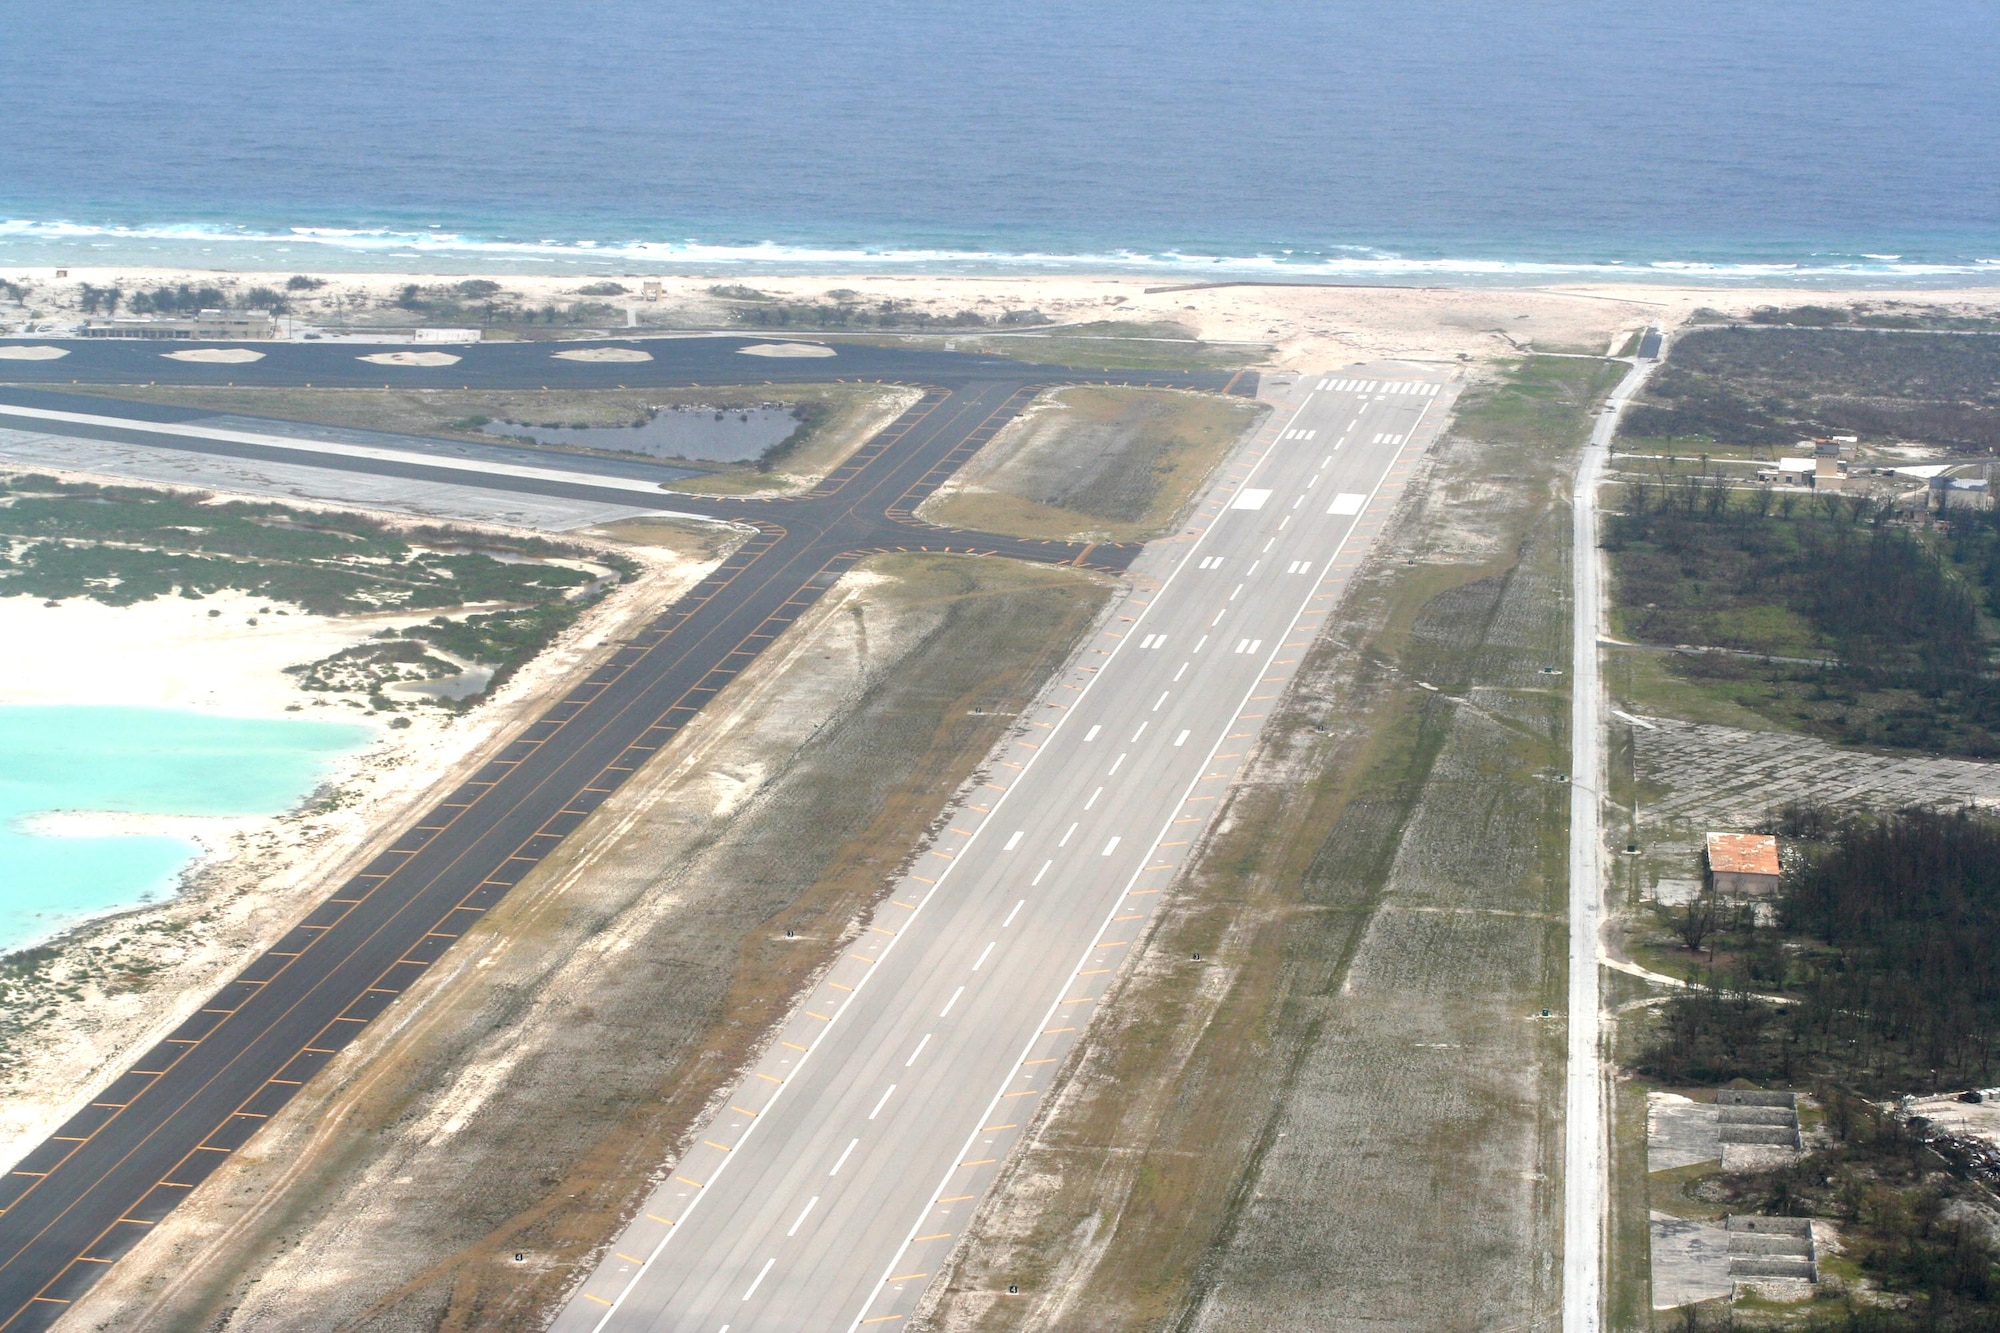 A Coast Guard flyover of Wake Island Sept. 2 shows little apparent damage from Super Typhoon Ioke around the runway and taxiway, officials said. (U.S. Coast Guard photo)